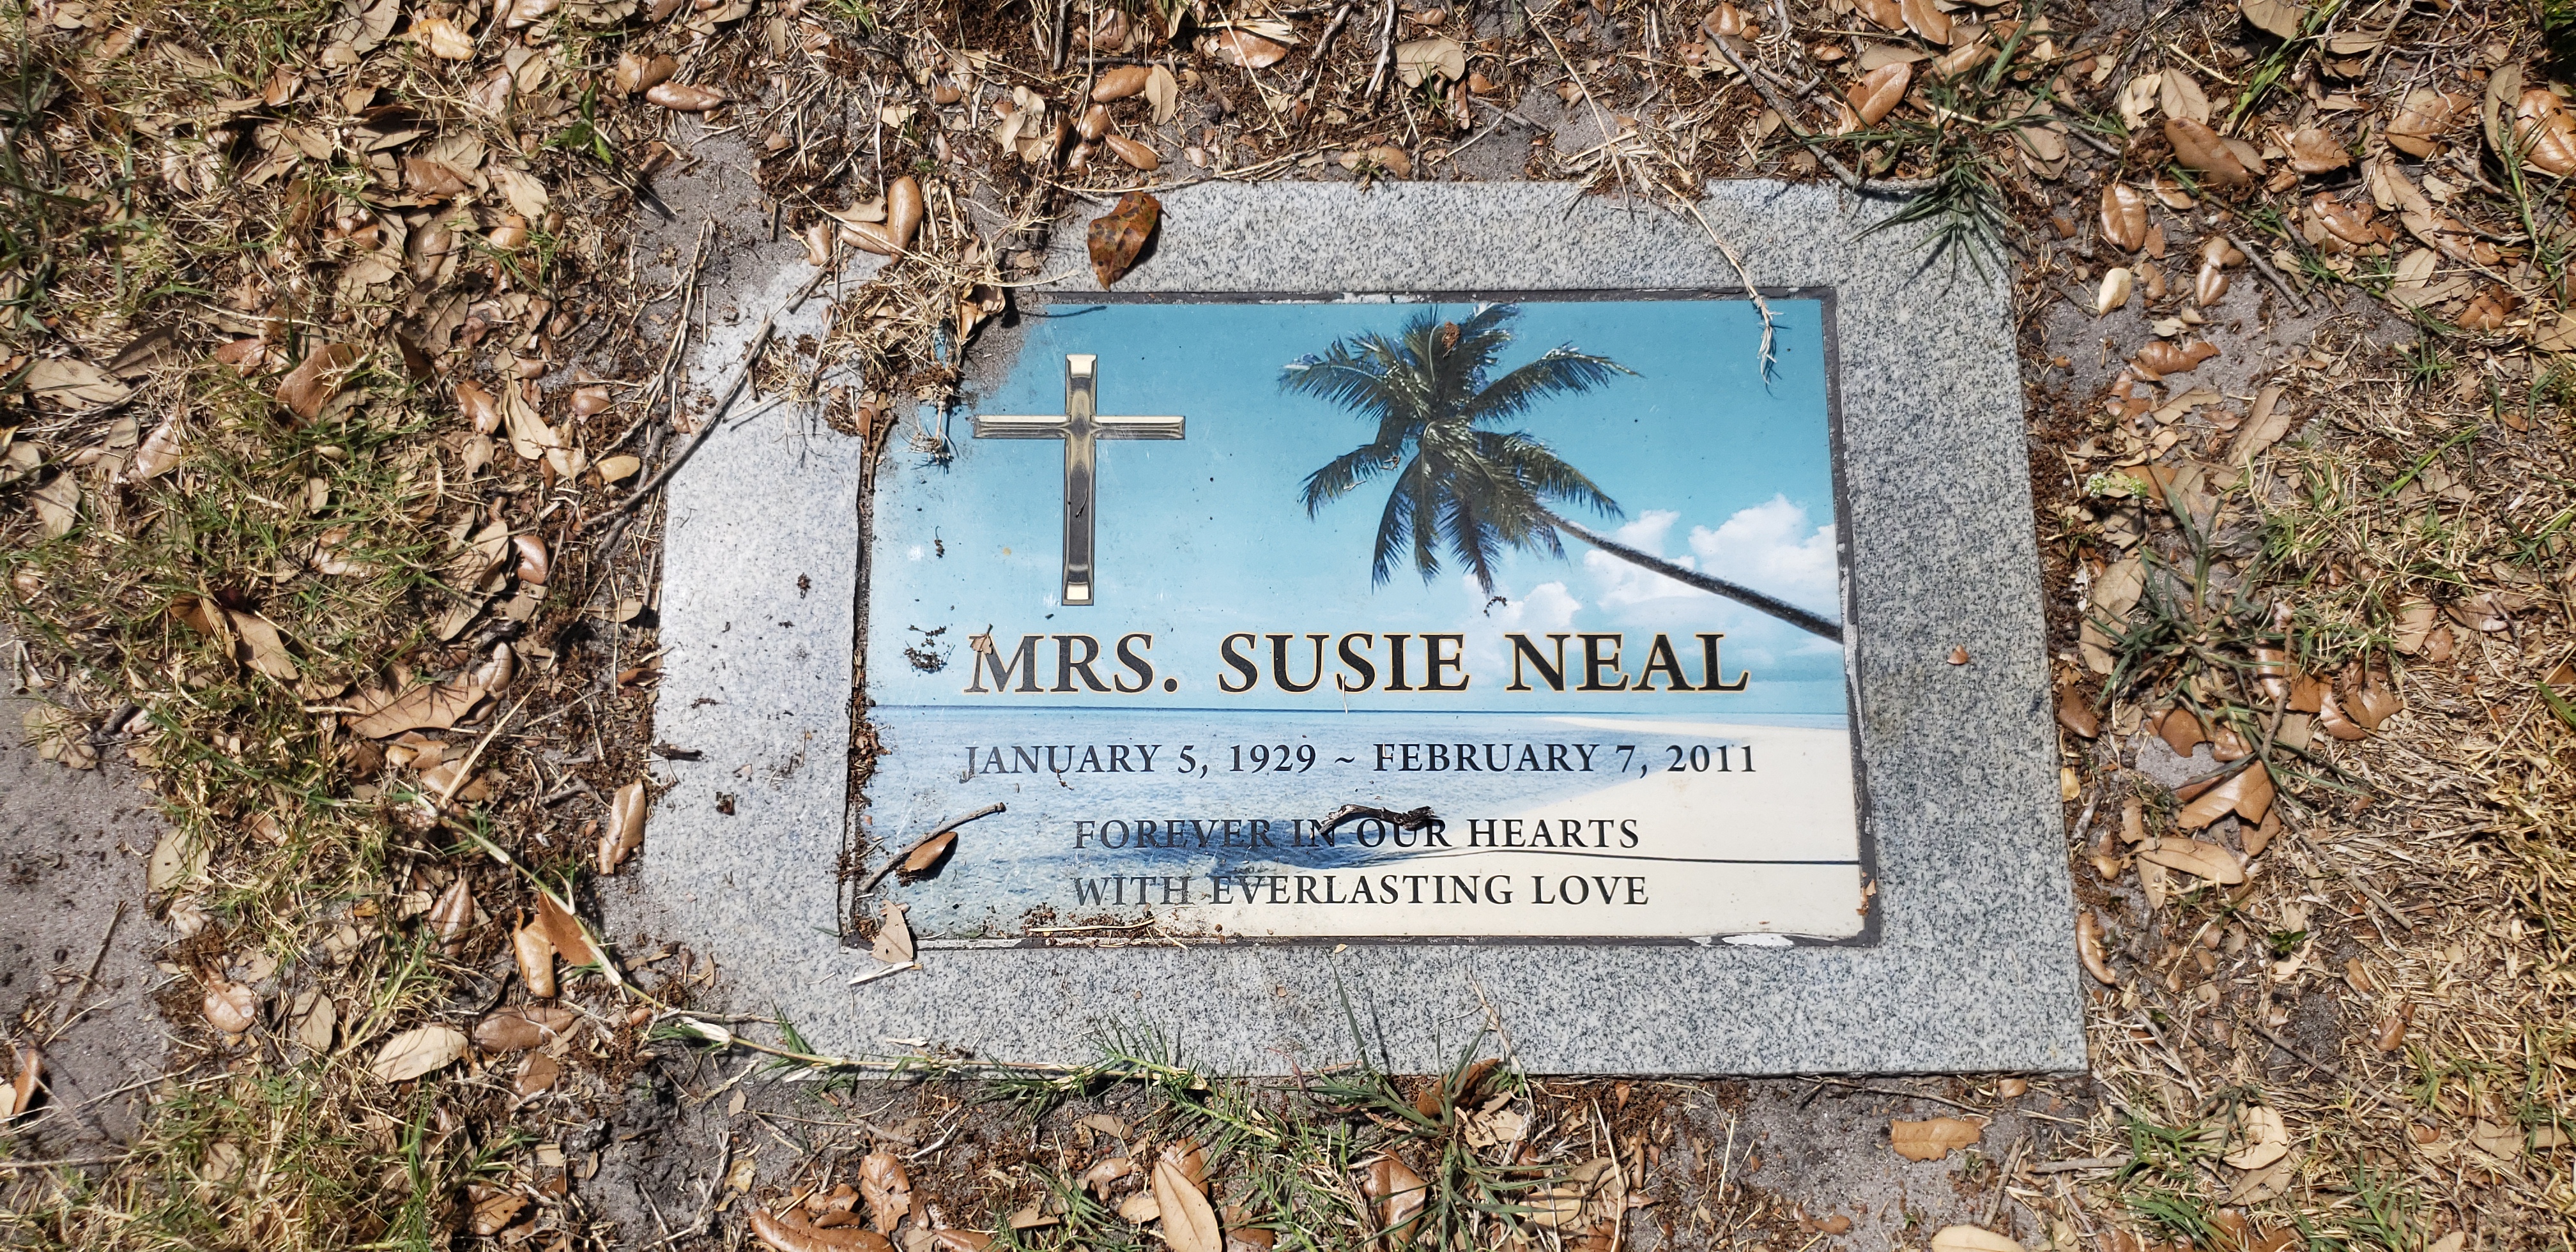 Susie Neal